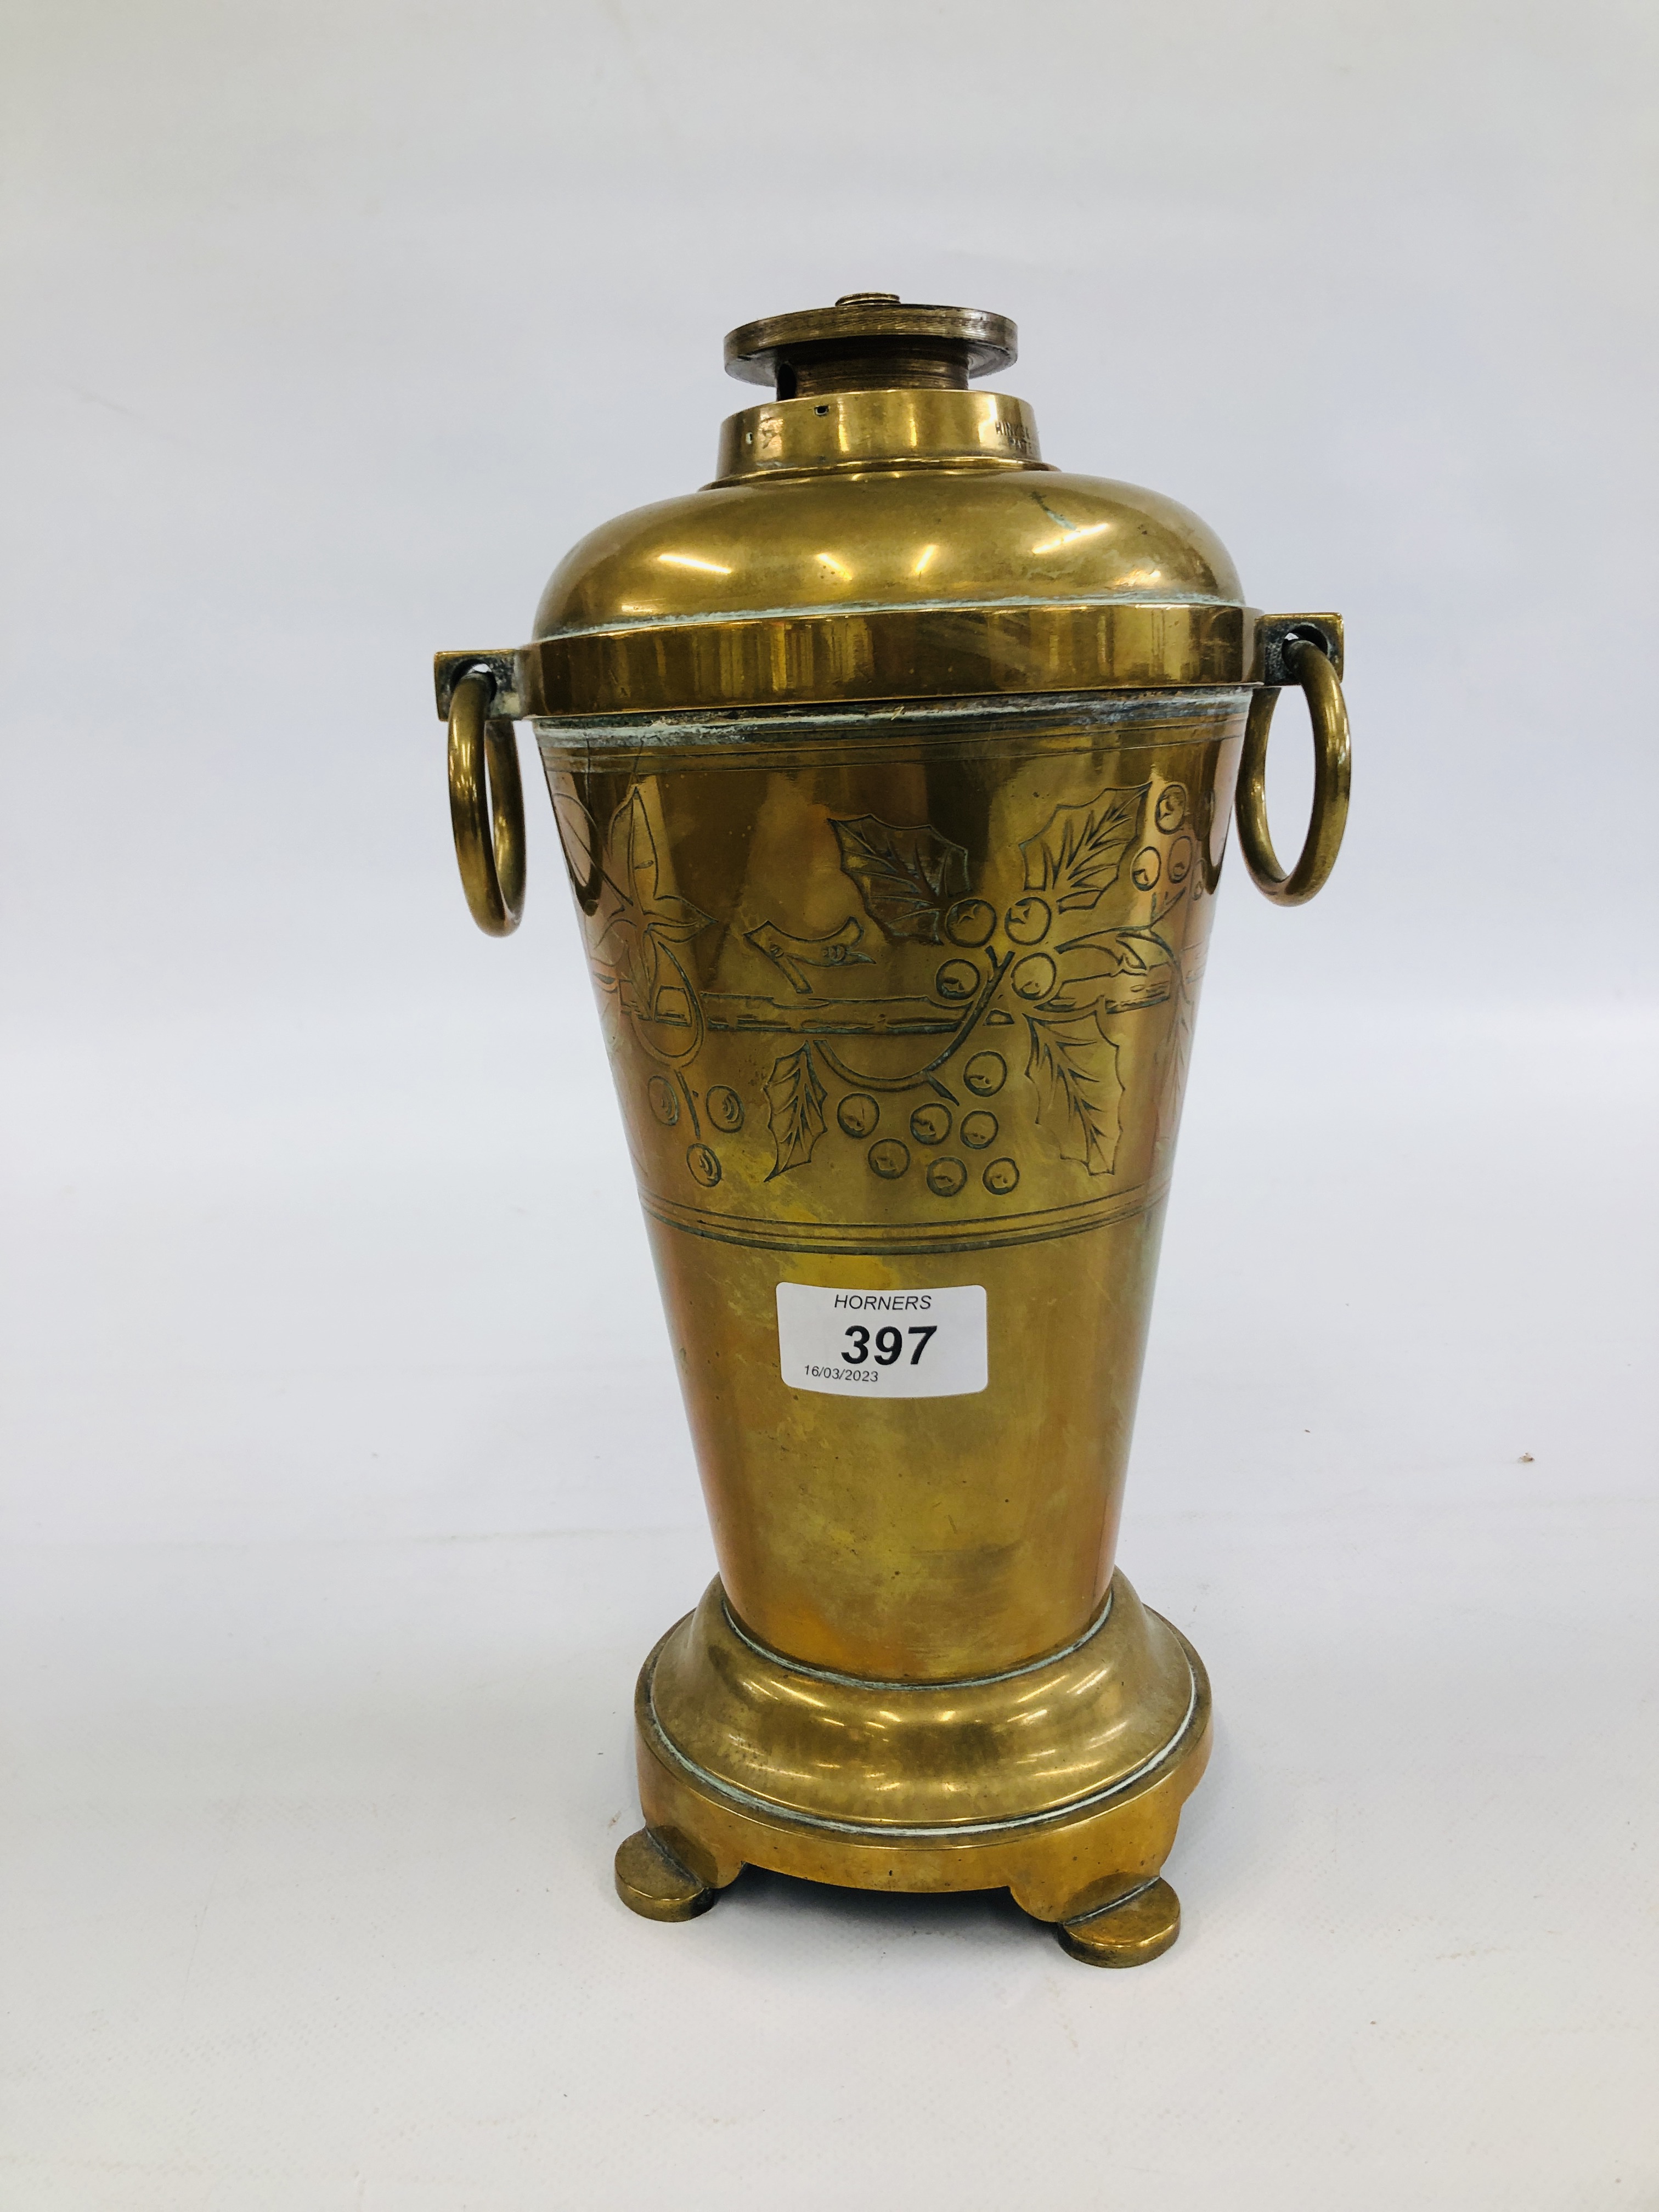 A VINTAGE BRASS OIL LAMP STAMPED WITH ORIGINAL MAKERS MARK "HINKS & SONS" PATENT - H 30CM.